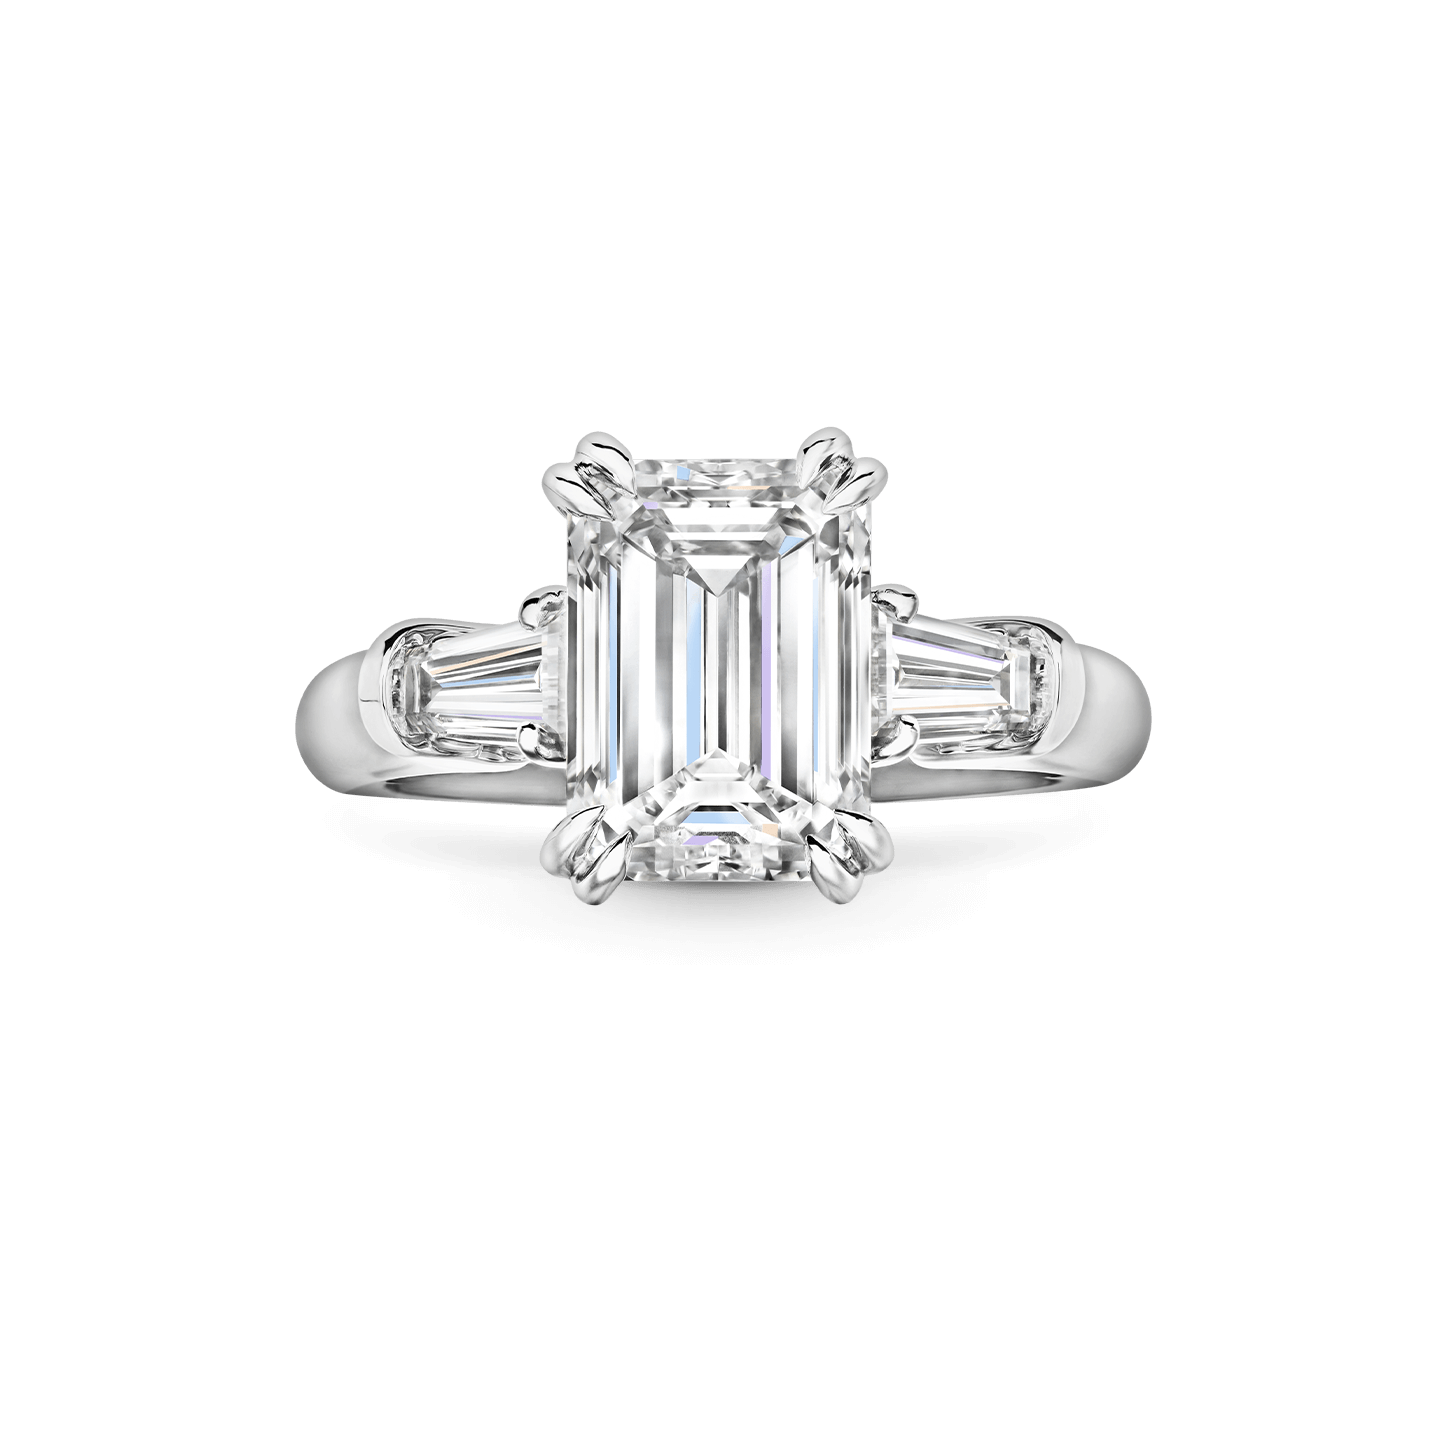 Front view of the Classic Winston Emerald-Cut Engagement Ring with Tapered Baguette Side Stones